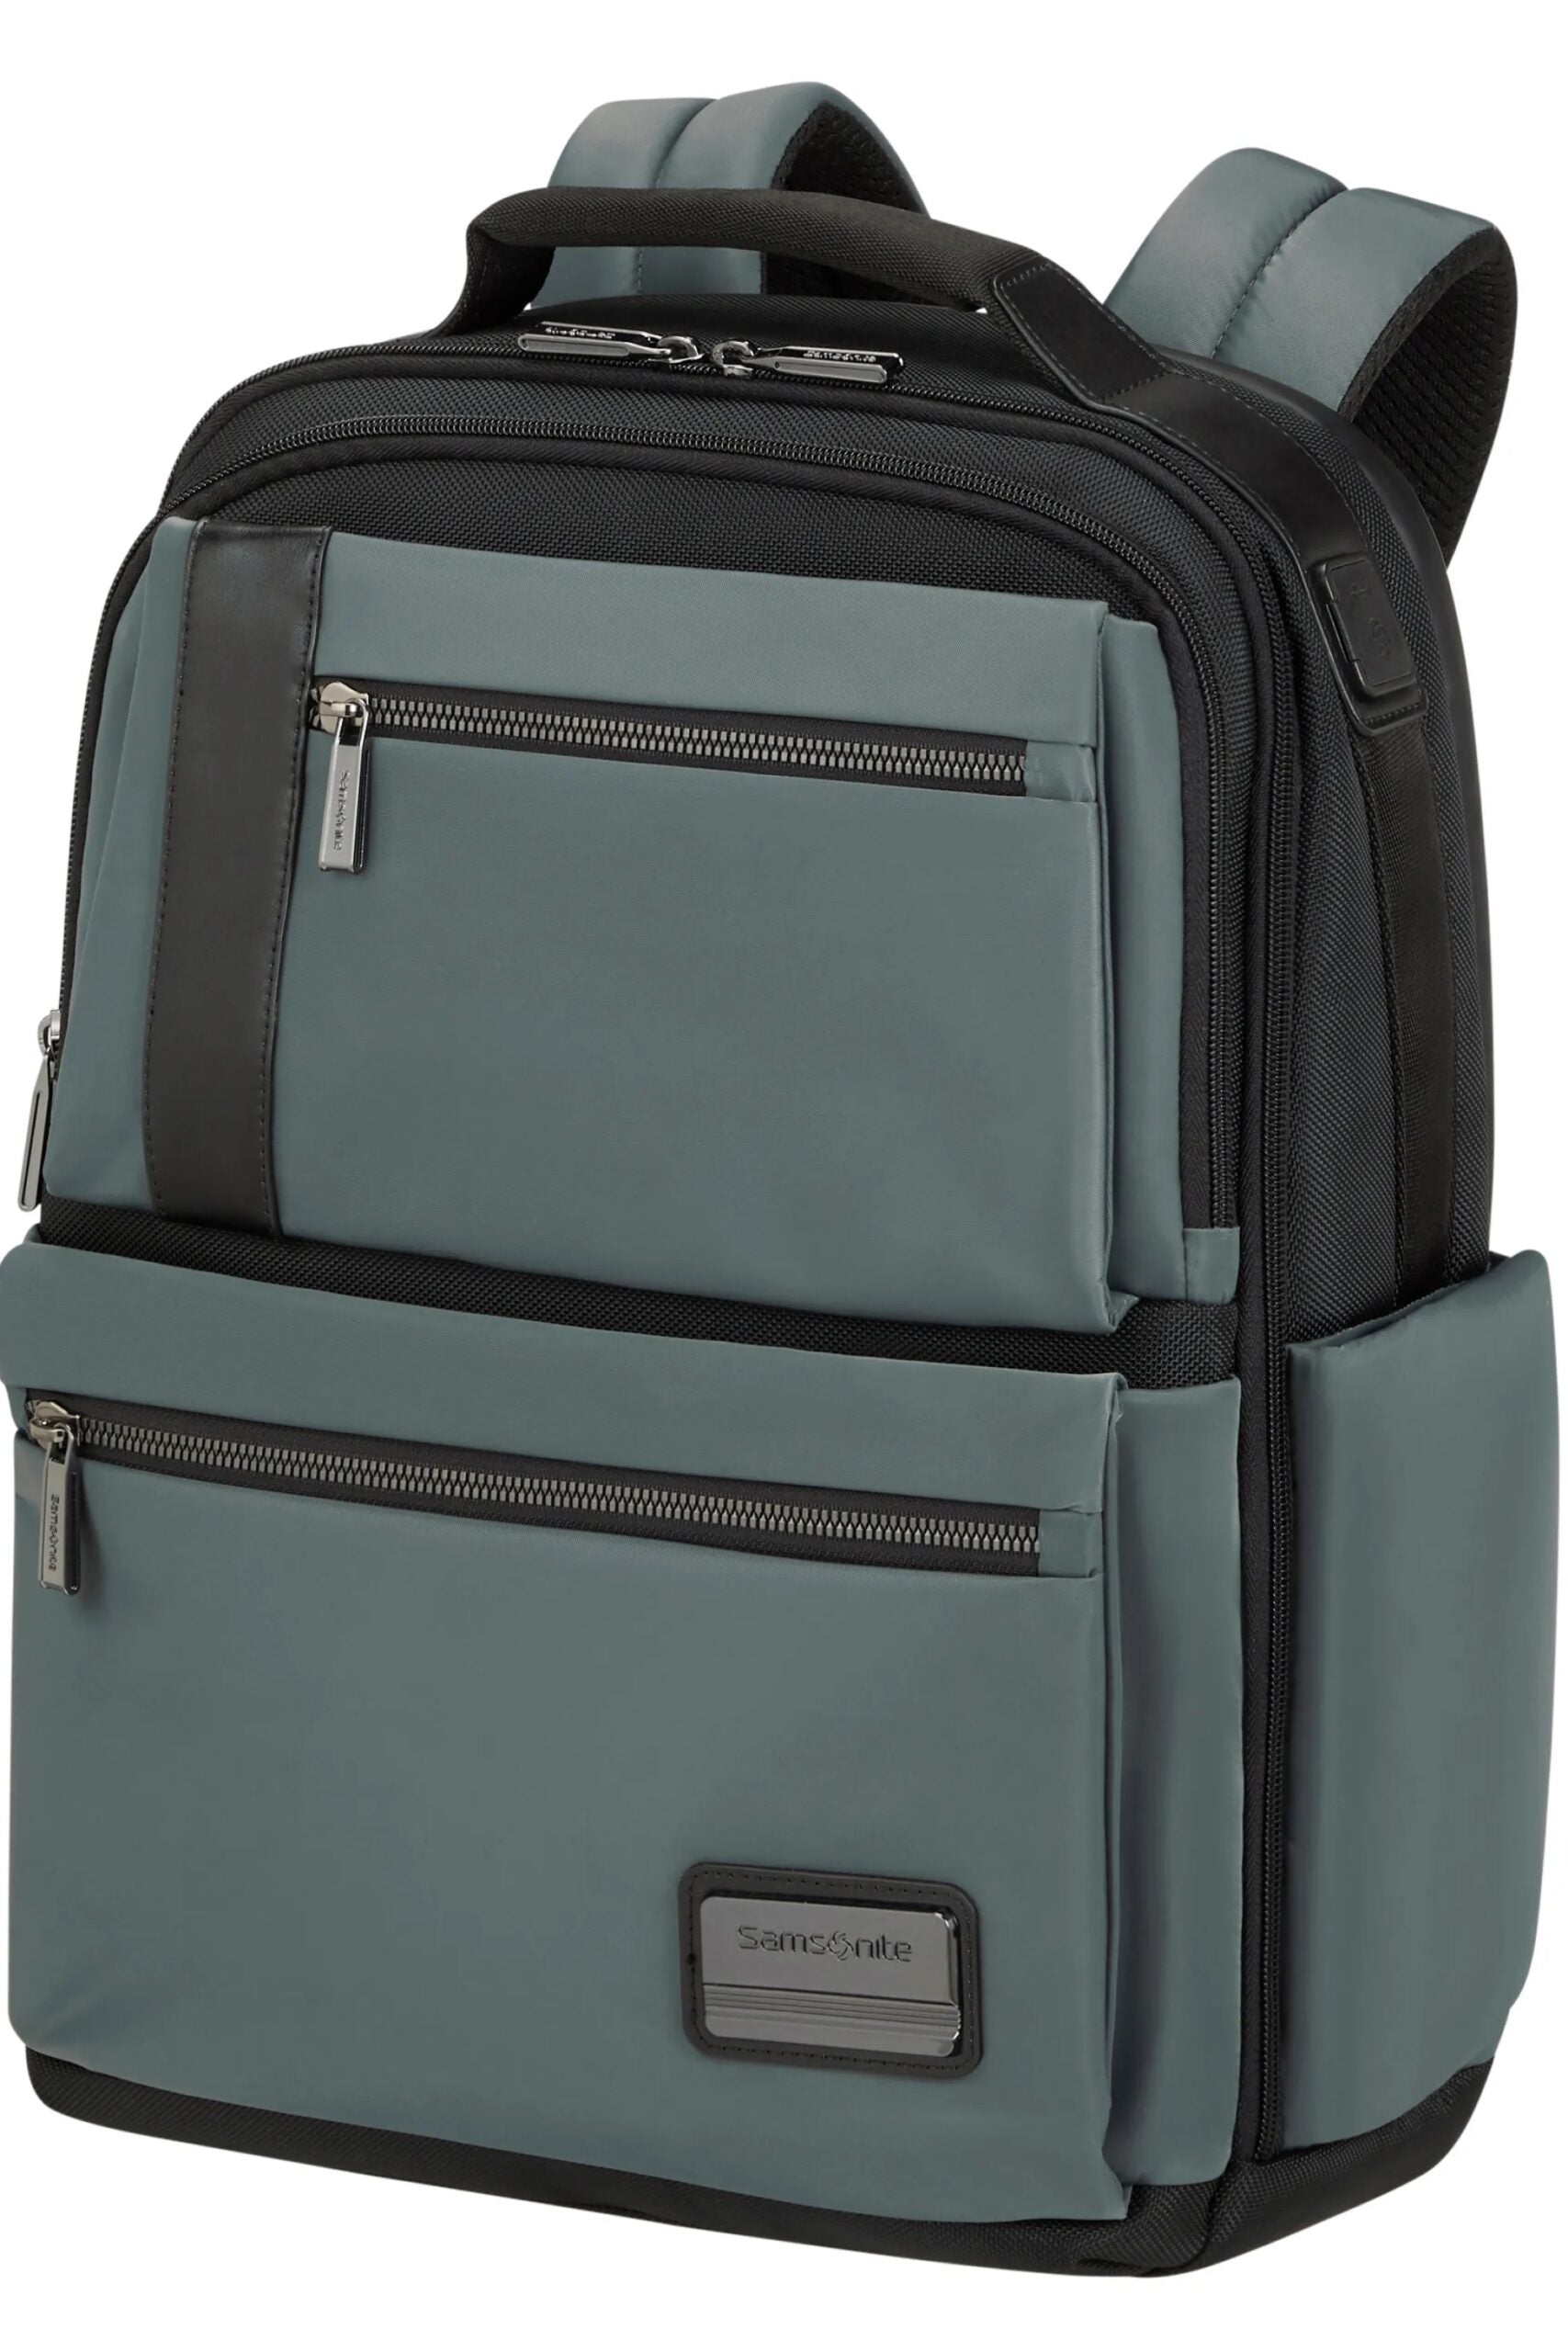 Openroad backpack grey 15.6 2